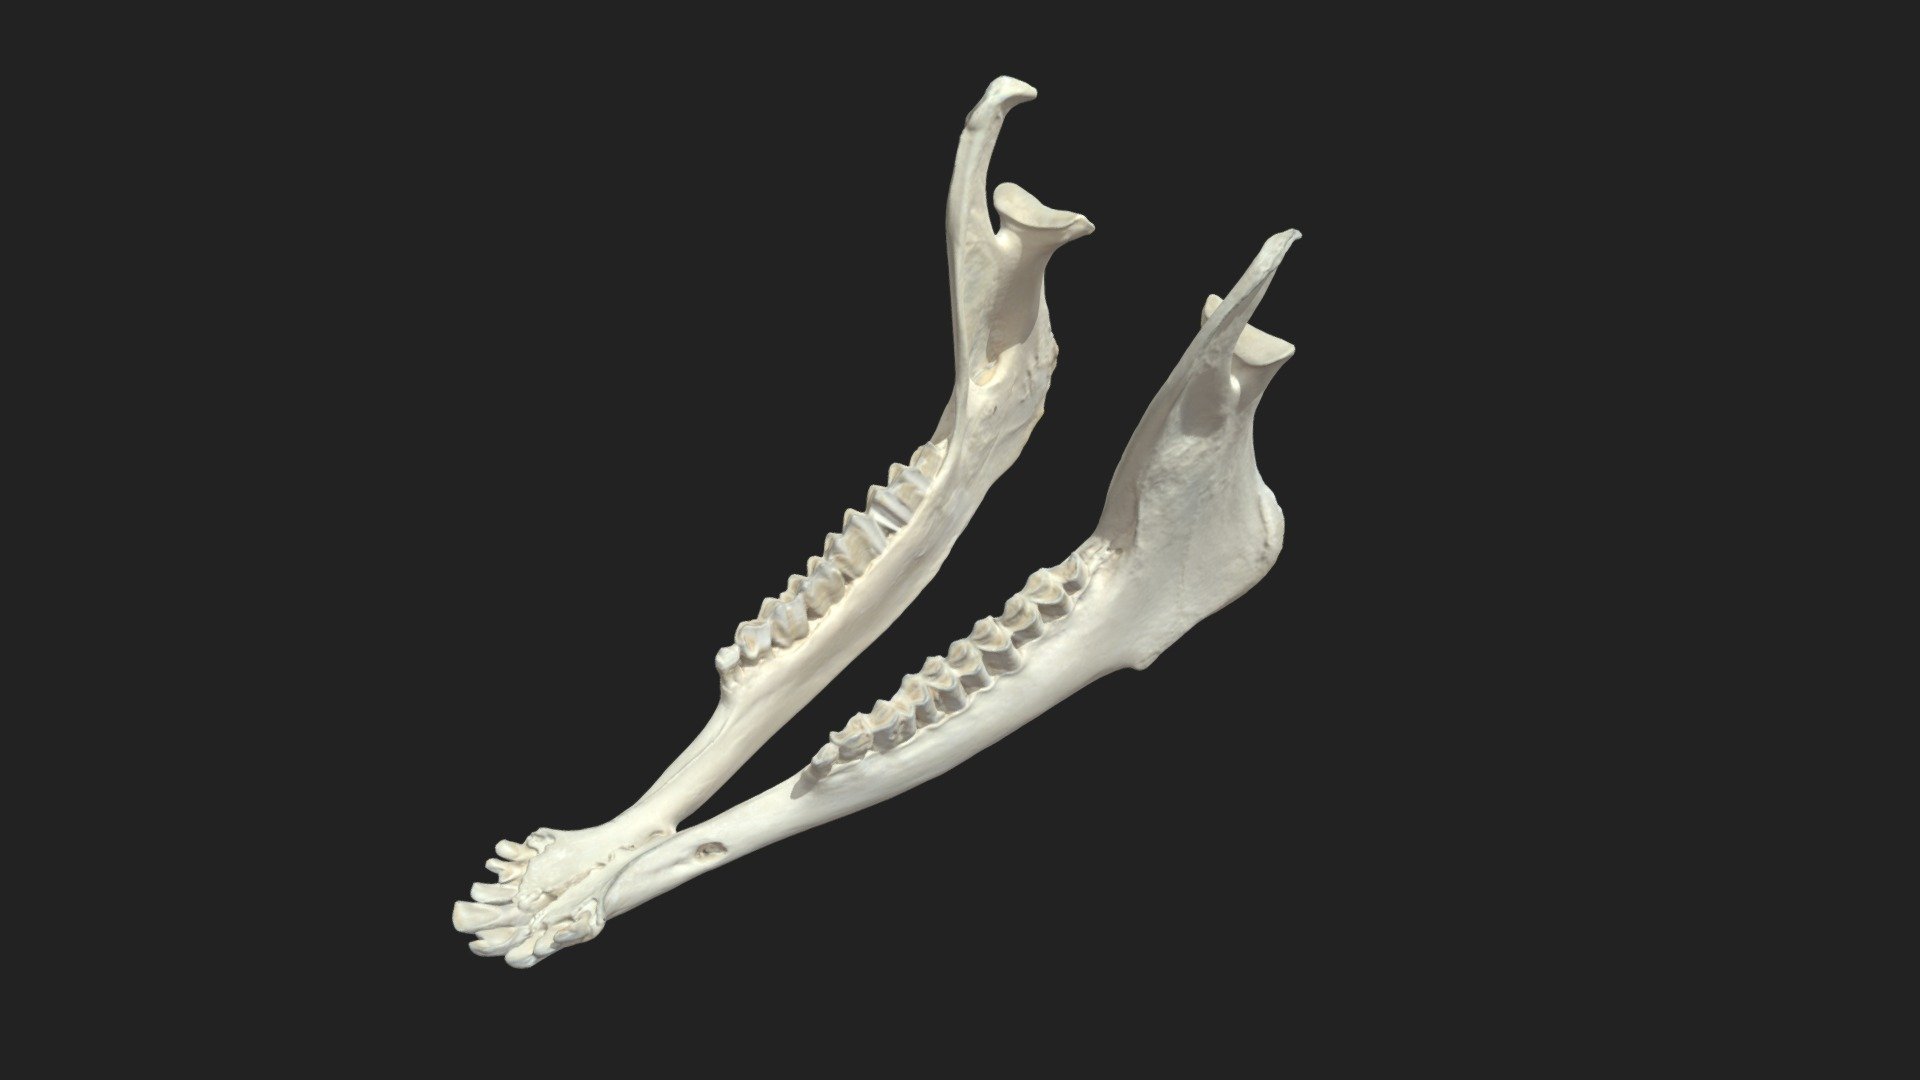 mandible (mandibula) of a goat

size of the specimen: 201 x 111 x 81 mm

3D scanning performed with the structured light scanner “Artec Space Spider” - lower jaw (mandibula) goat - 3D model by vetanatMunich 3d model